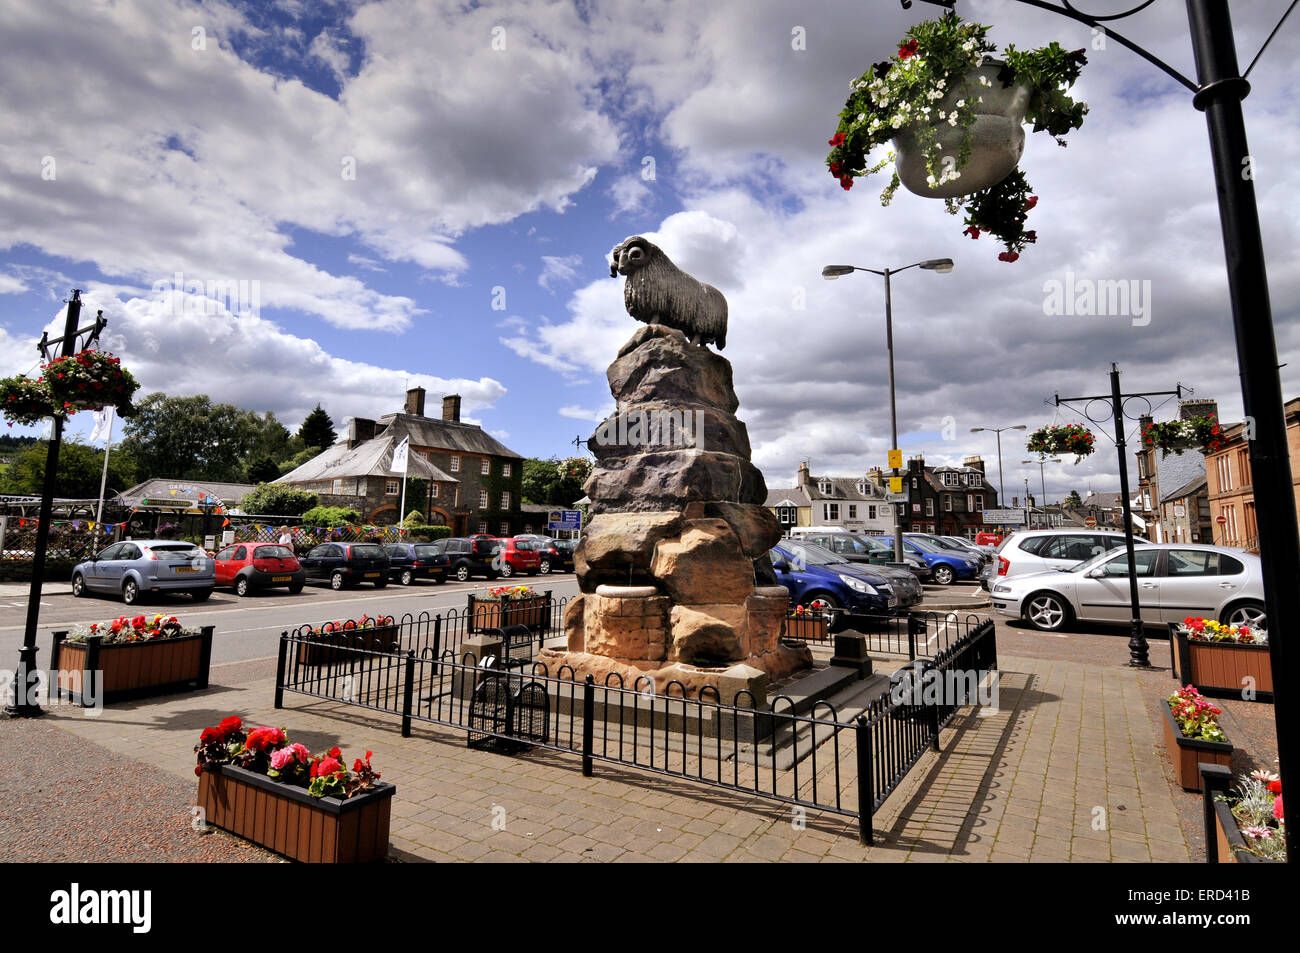 The Moffat Ram in moffat town Centre, Dumfries and Galloway, Scotland